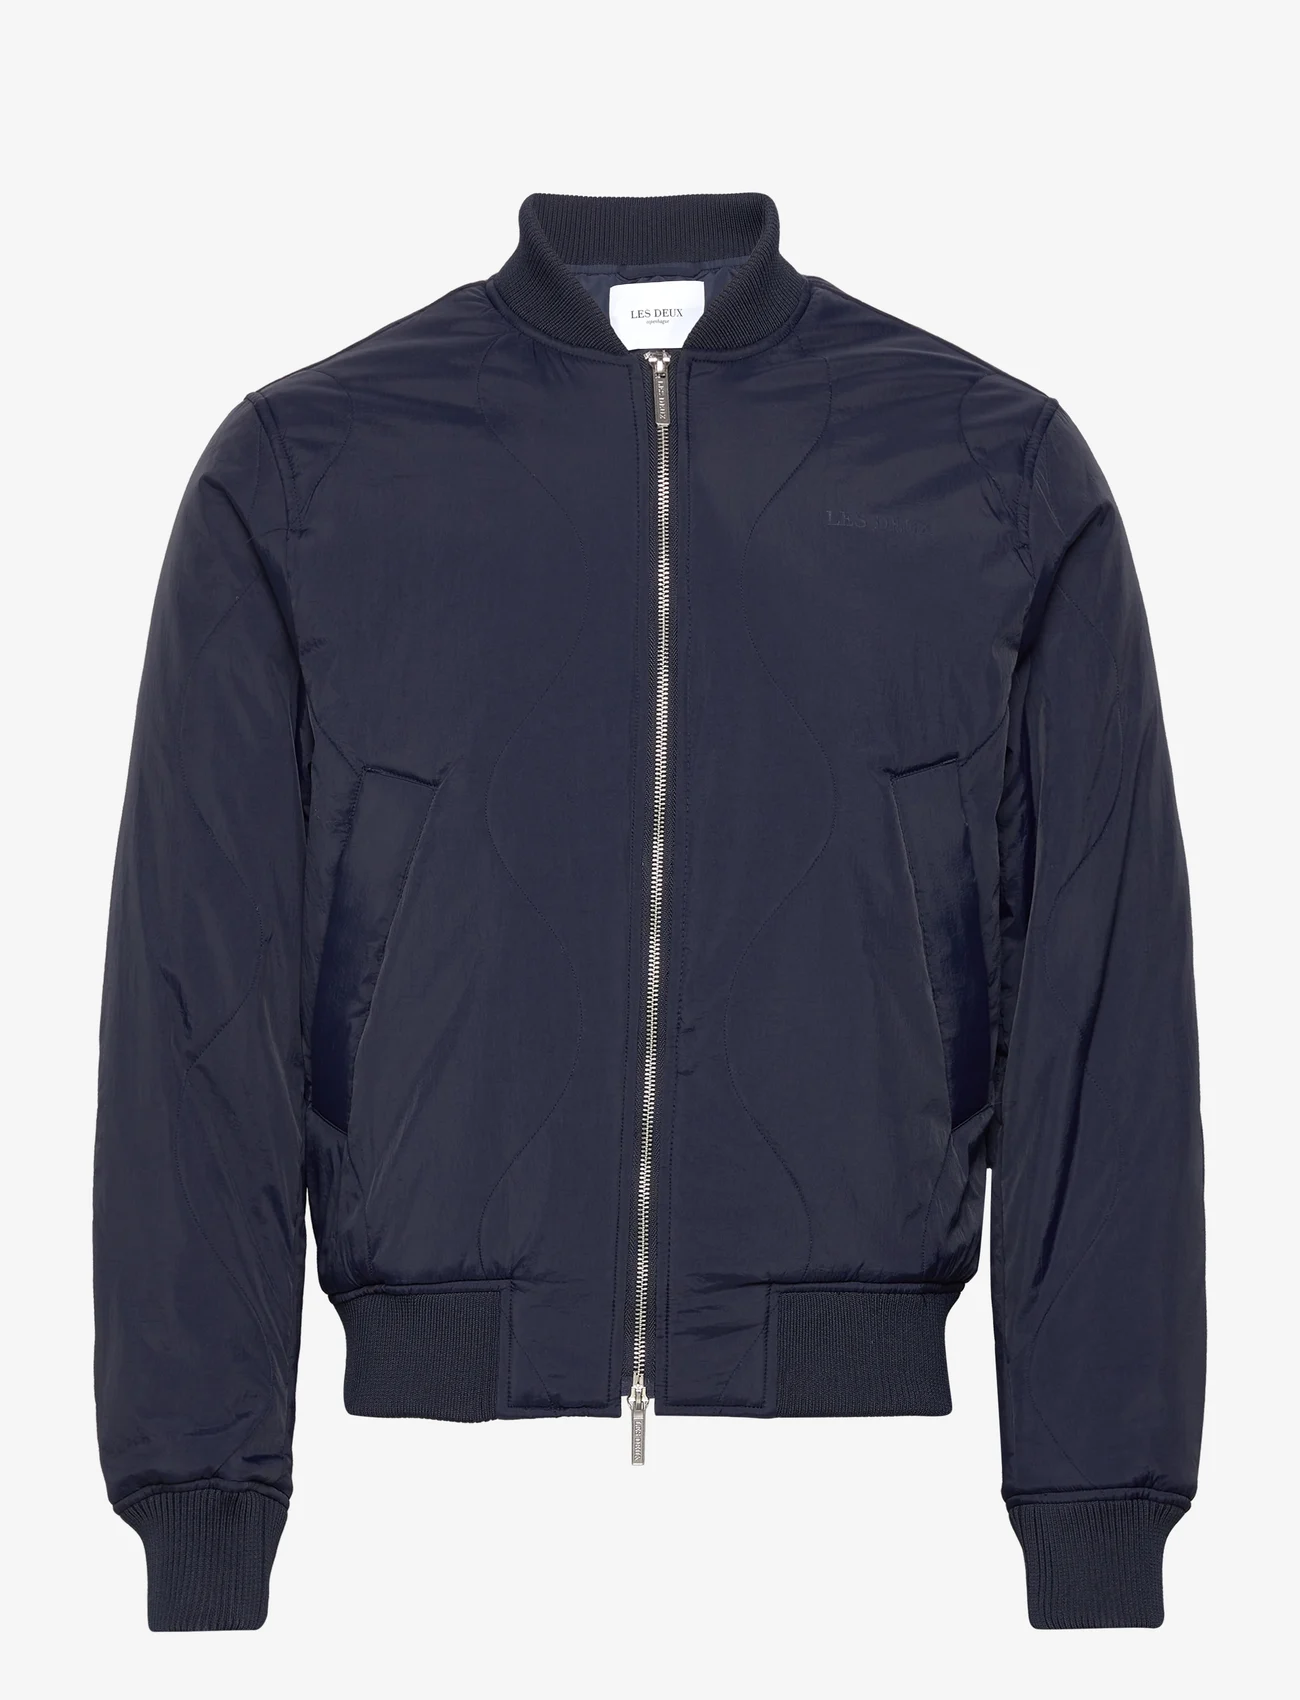 Les Deux - Norman Quilted Bomber Jacket - spring jackets - dark navy - 0